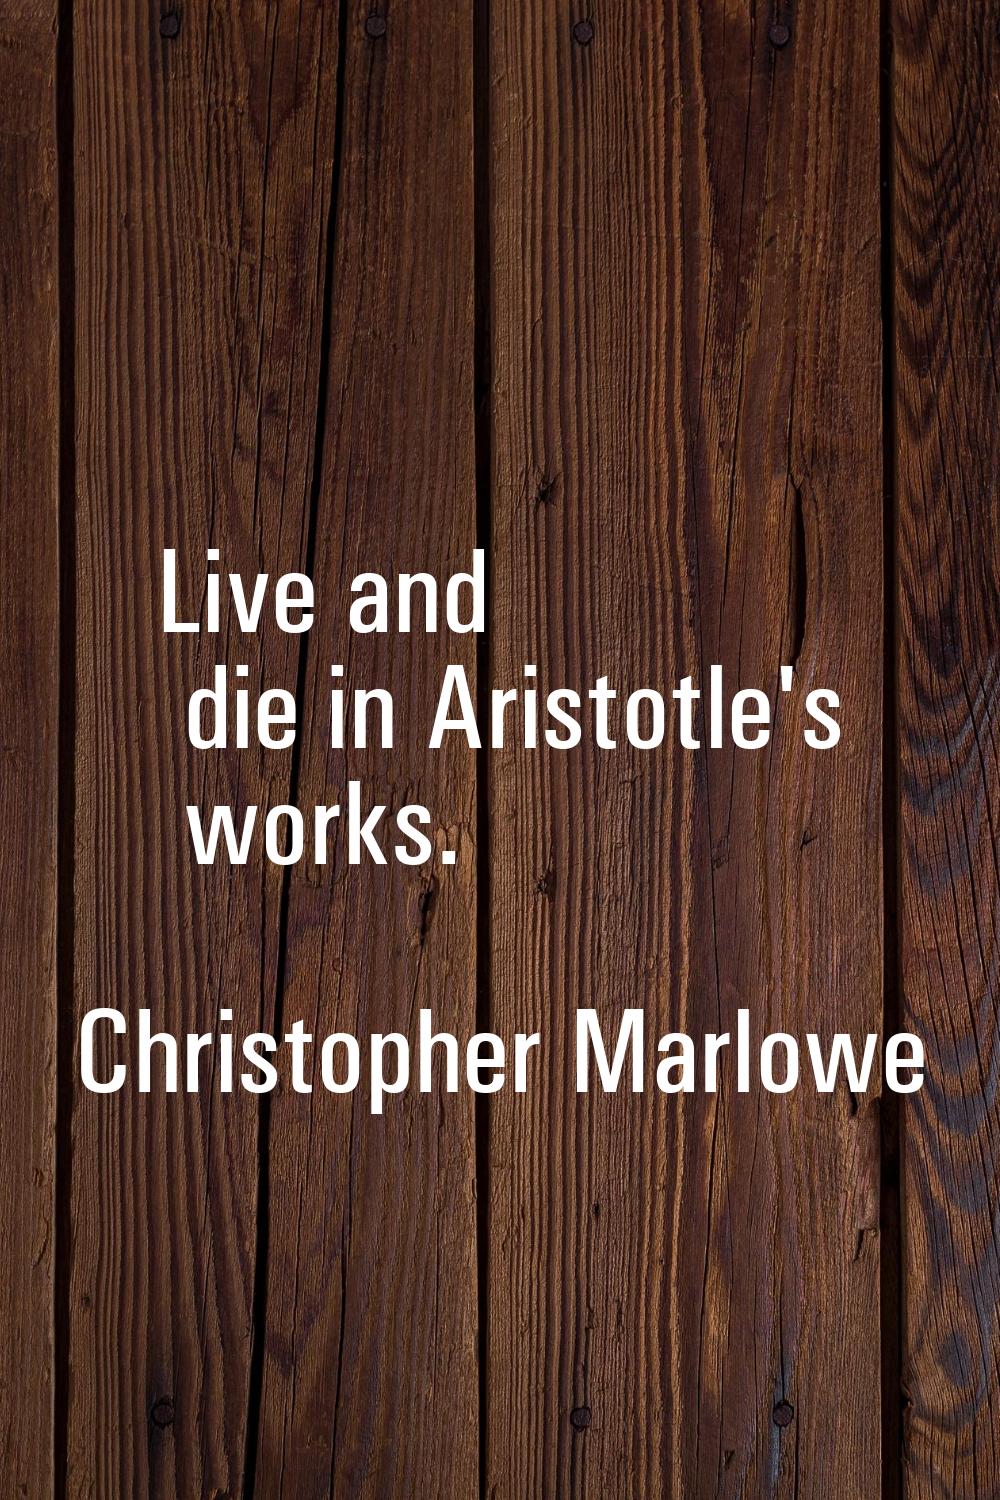 Live and die in Aristotle's works.